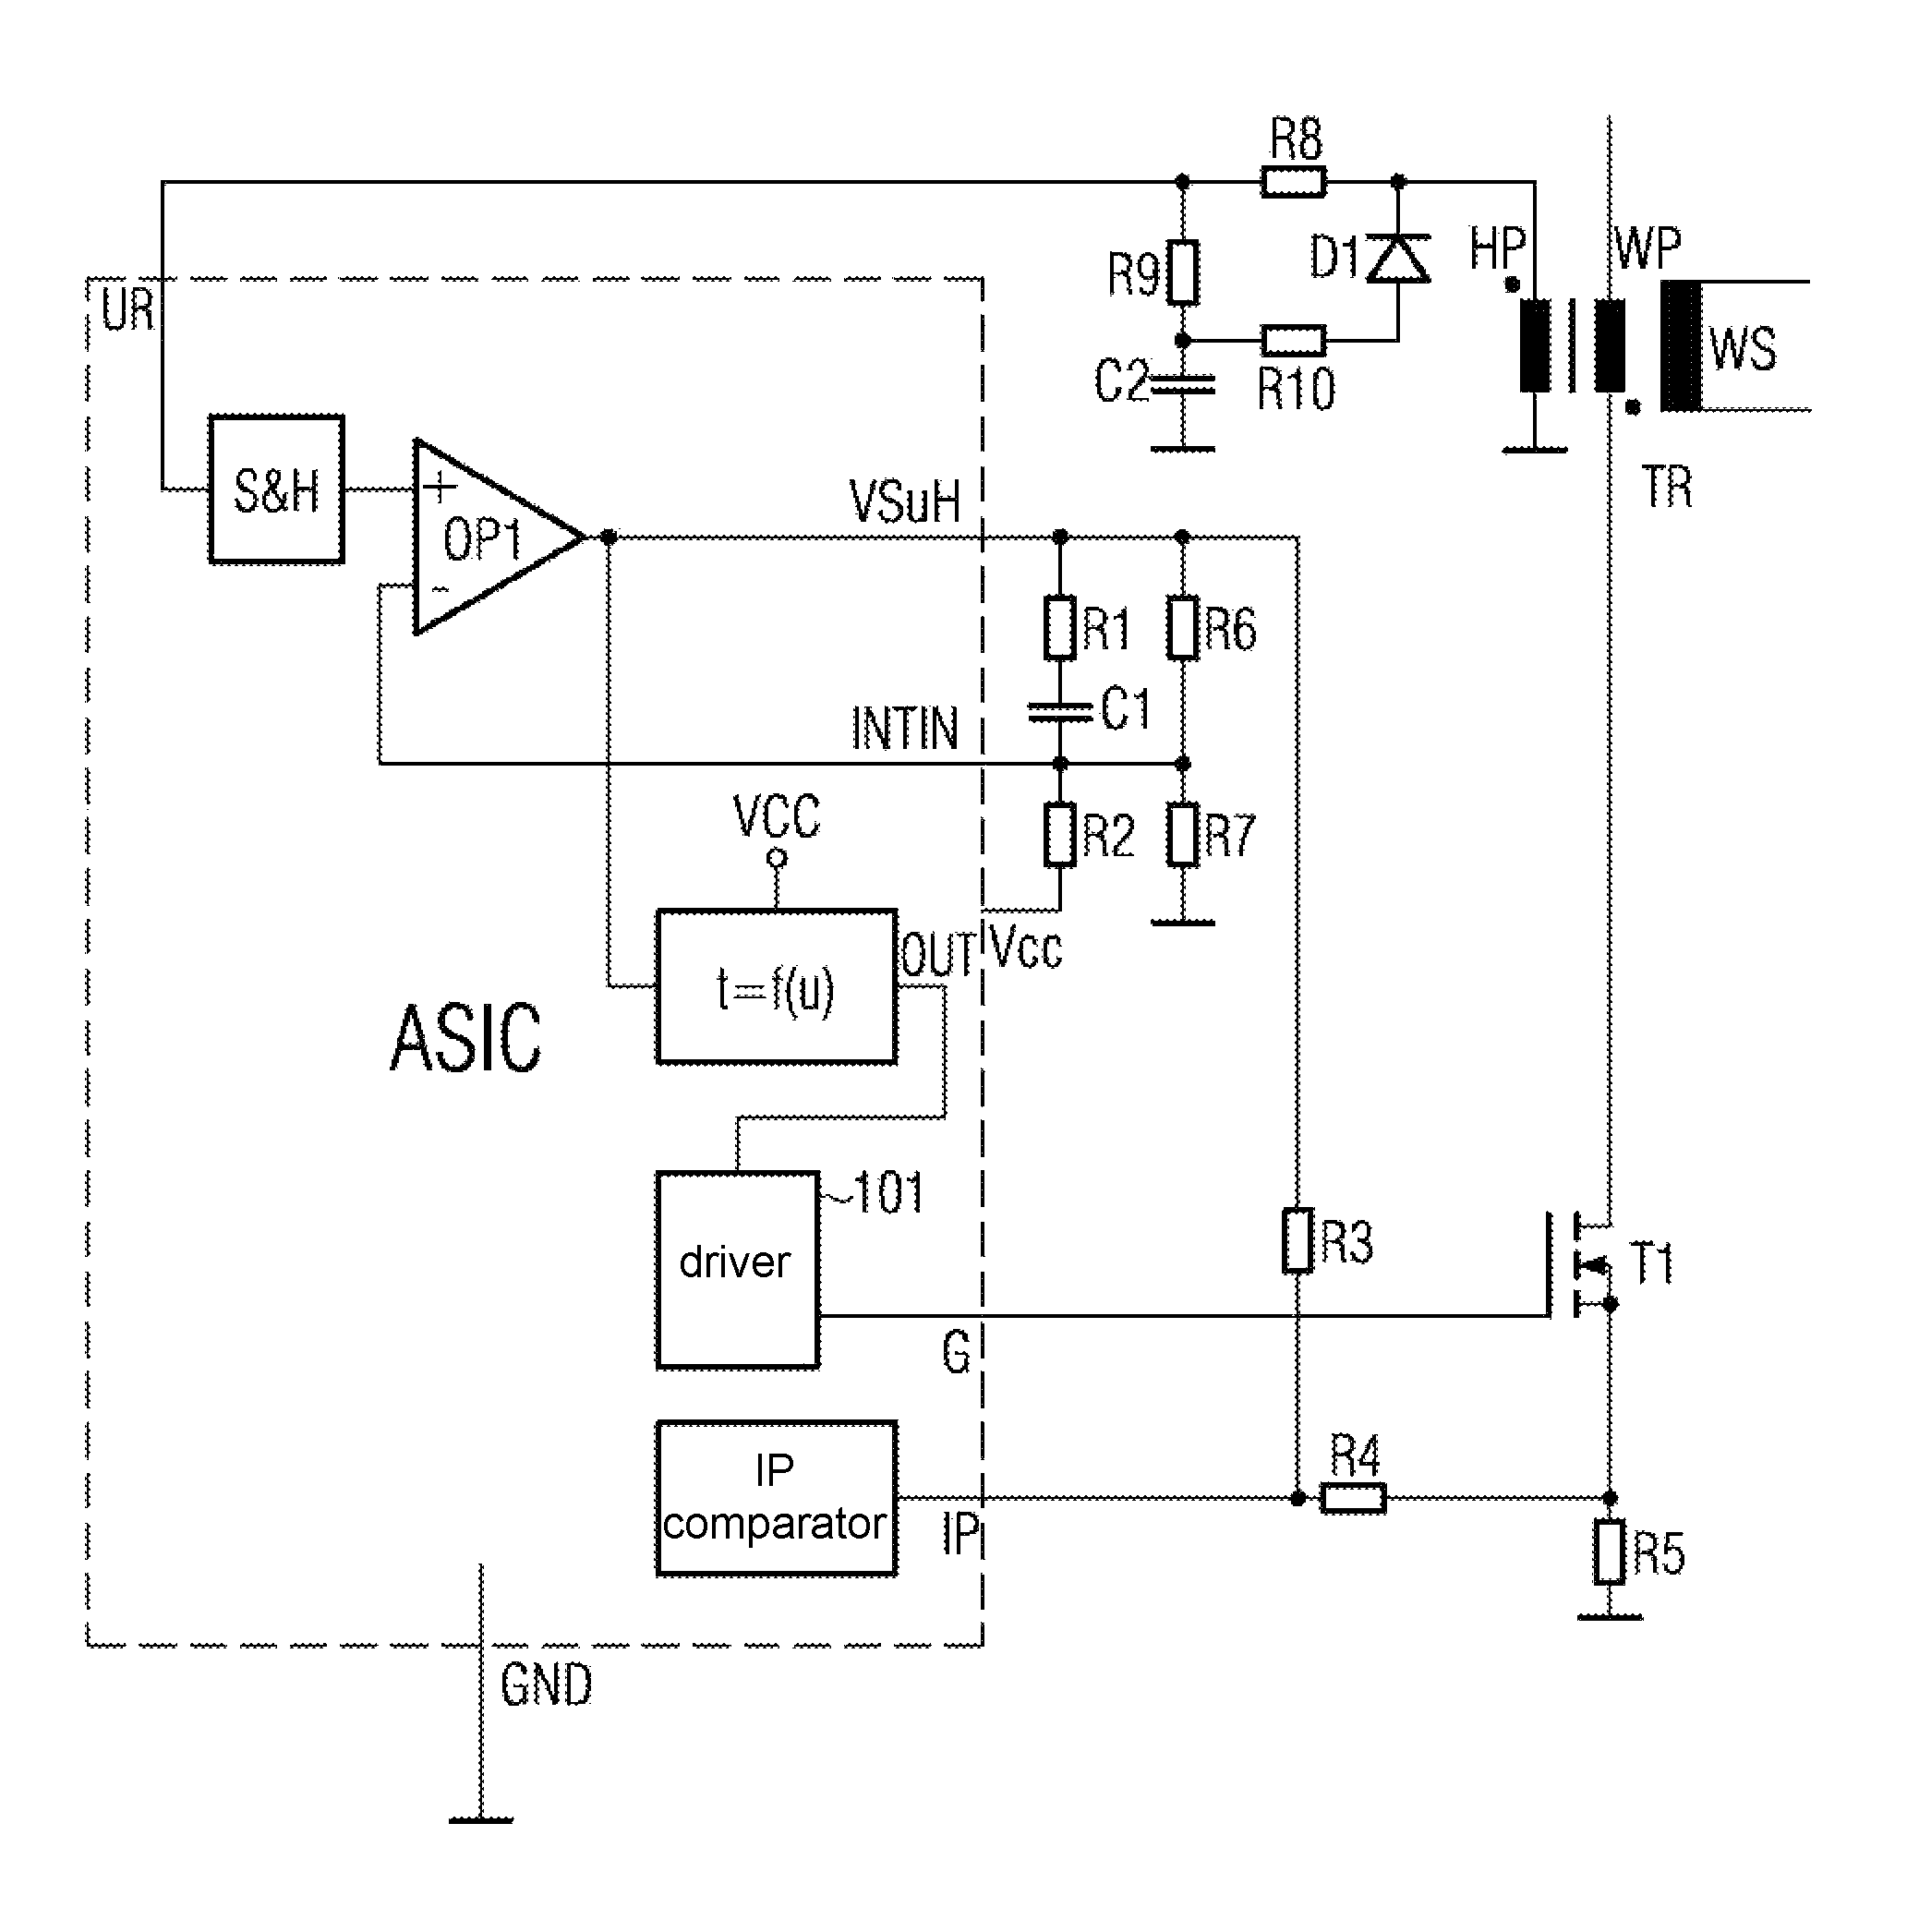 Control circuit for current and voltage control in a switching power supply